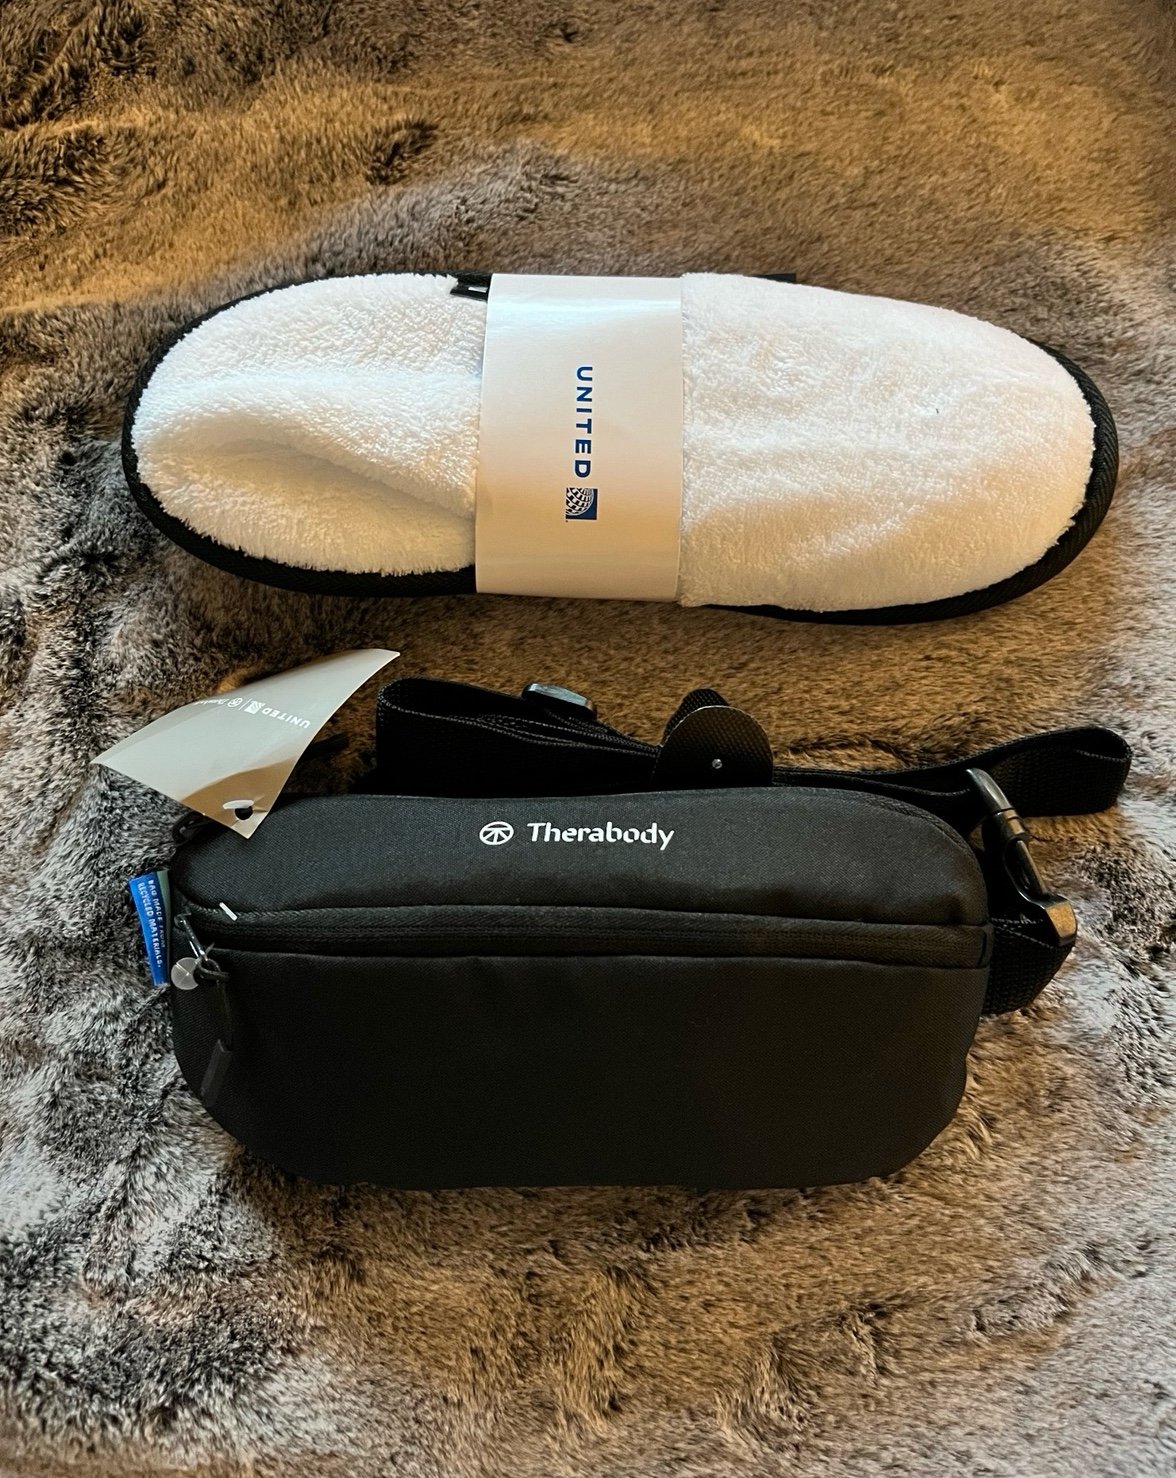 United Airlines business Class Amenity Kit (Cross Body) and slippers lZFDZu4Ge